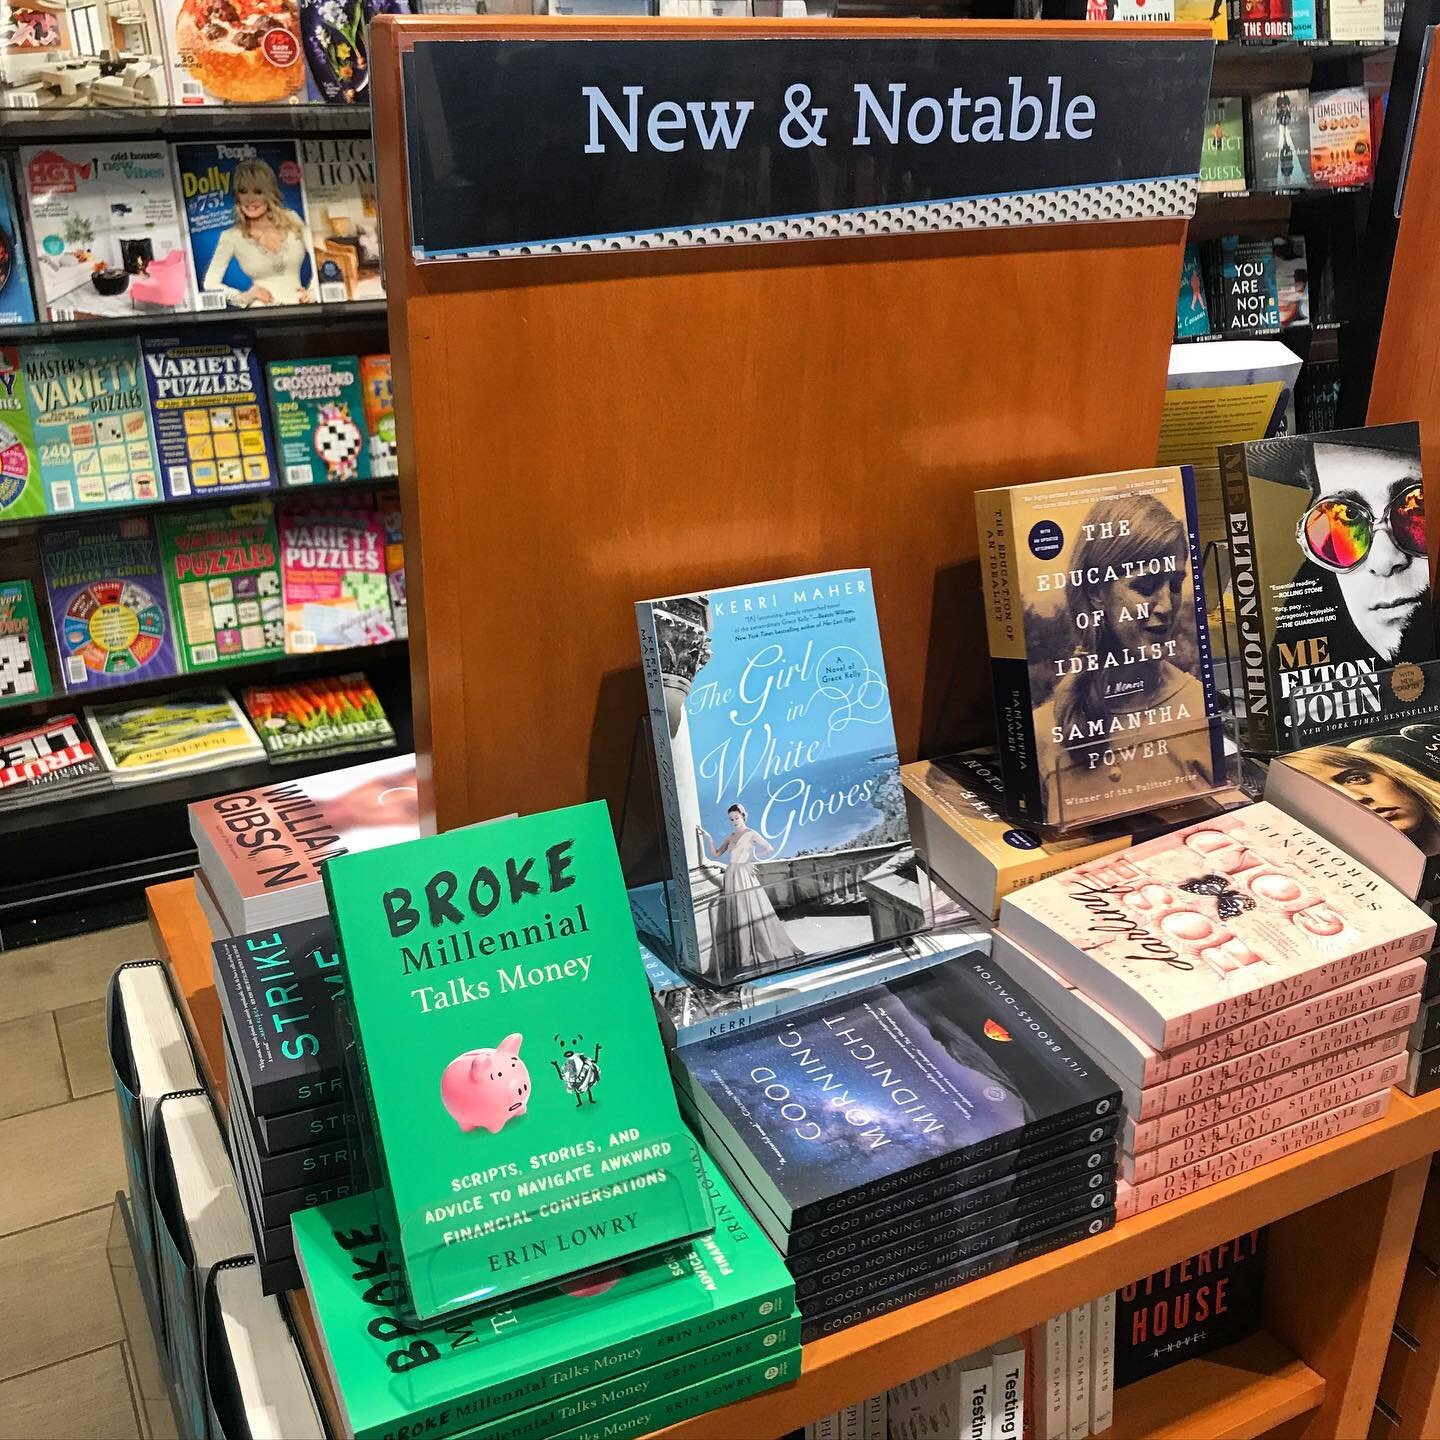 Broke Millennial Talks Money is at airports! ✈️ I still haven&rsquo;t gotten a chance to see this book on shelves (this photo was sent to me), but damn this really makes me miss flying even more. #talkmoney #BrokeMillennial #travel